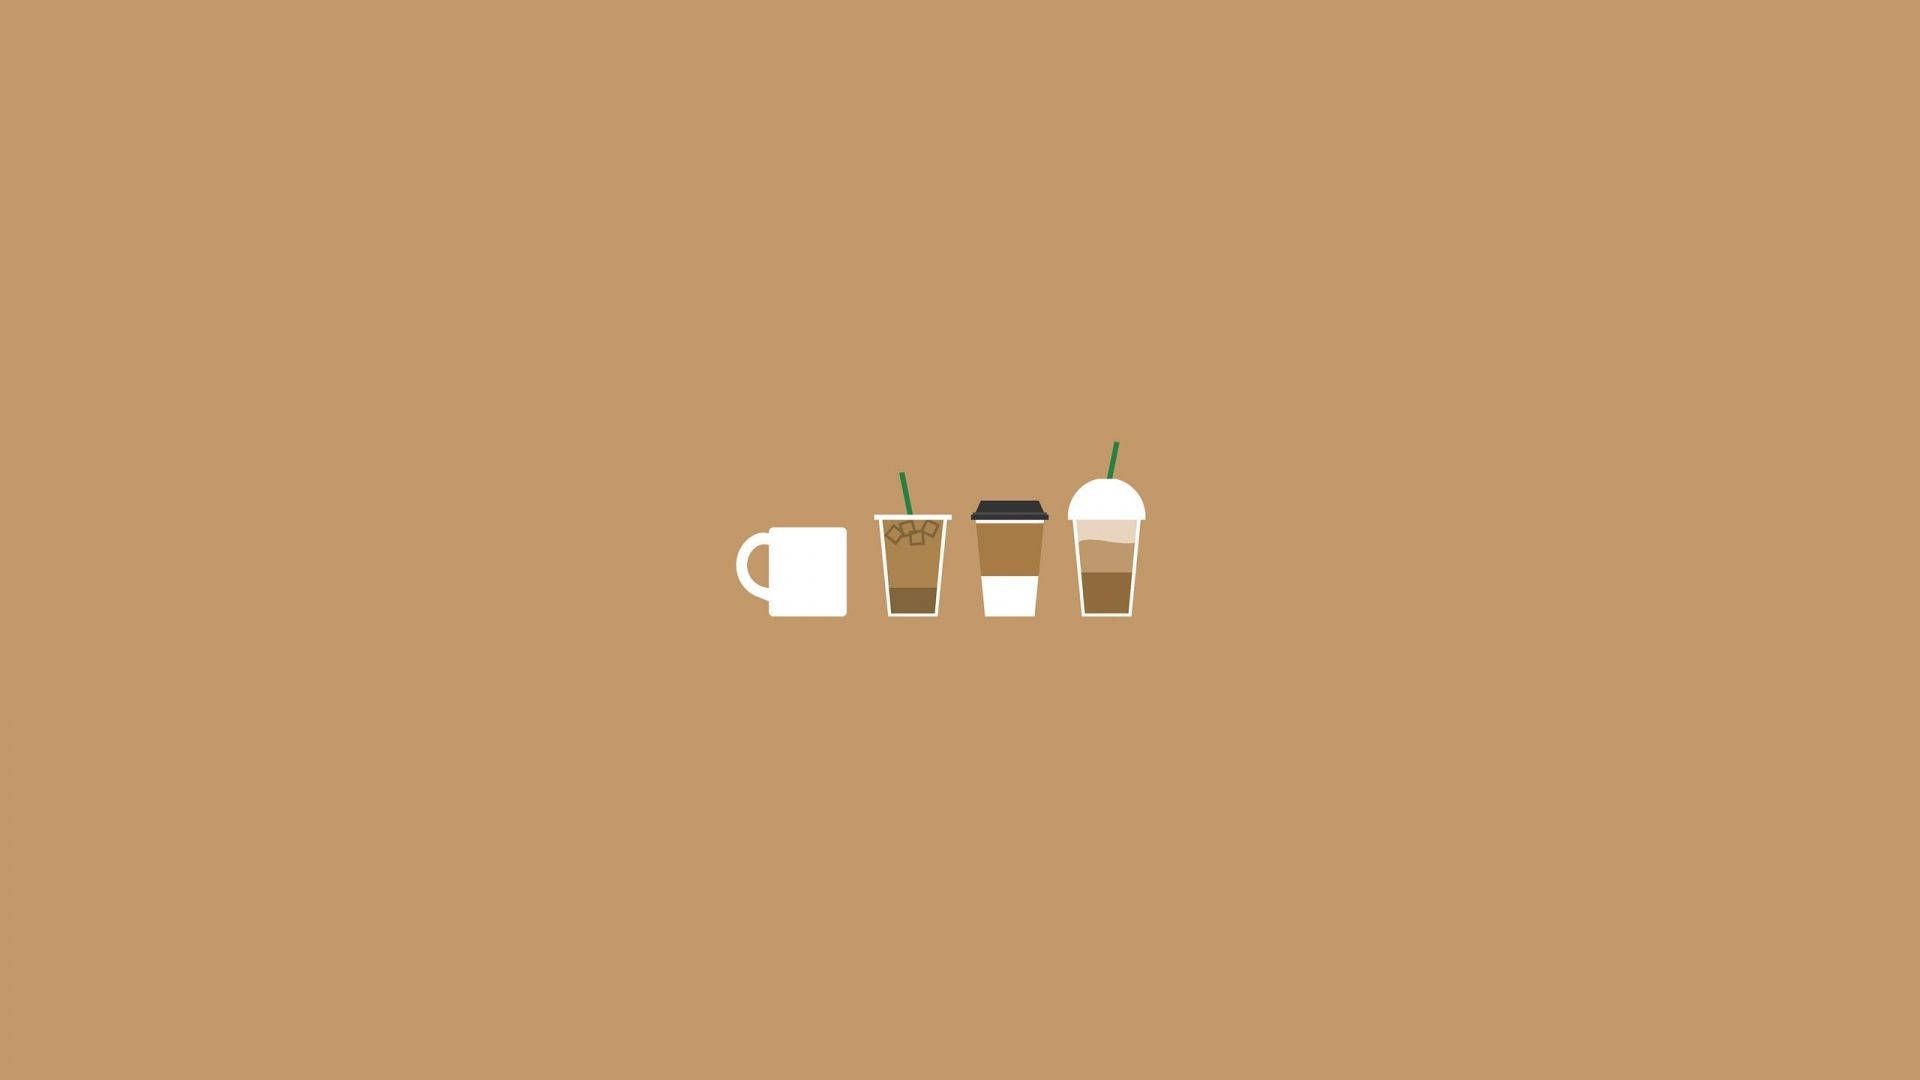 A starbucks coffee cup and straw on brown background - Desktop, minimalist